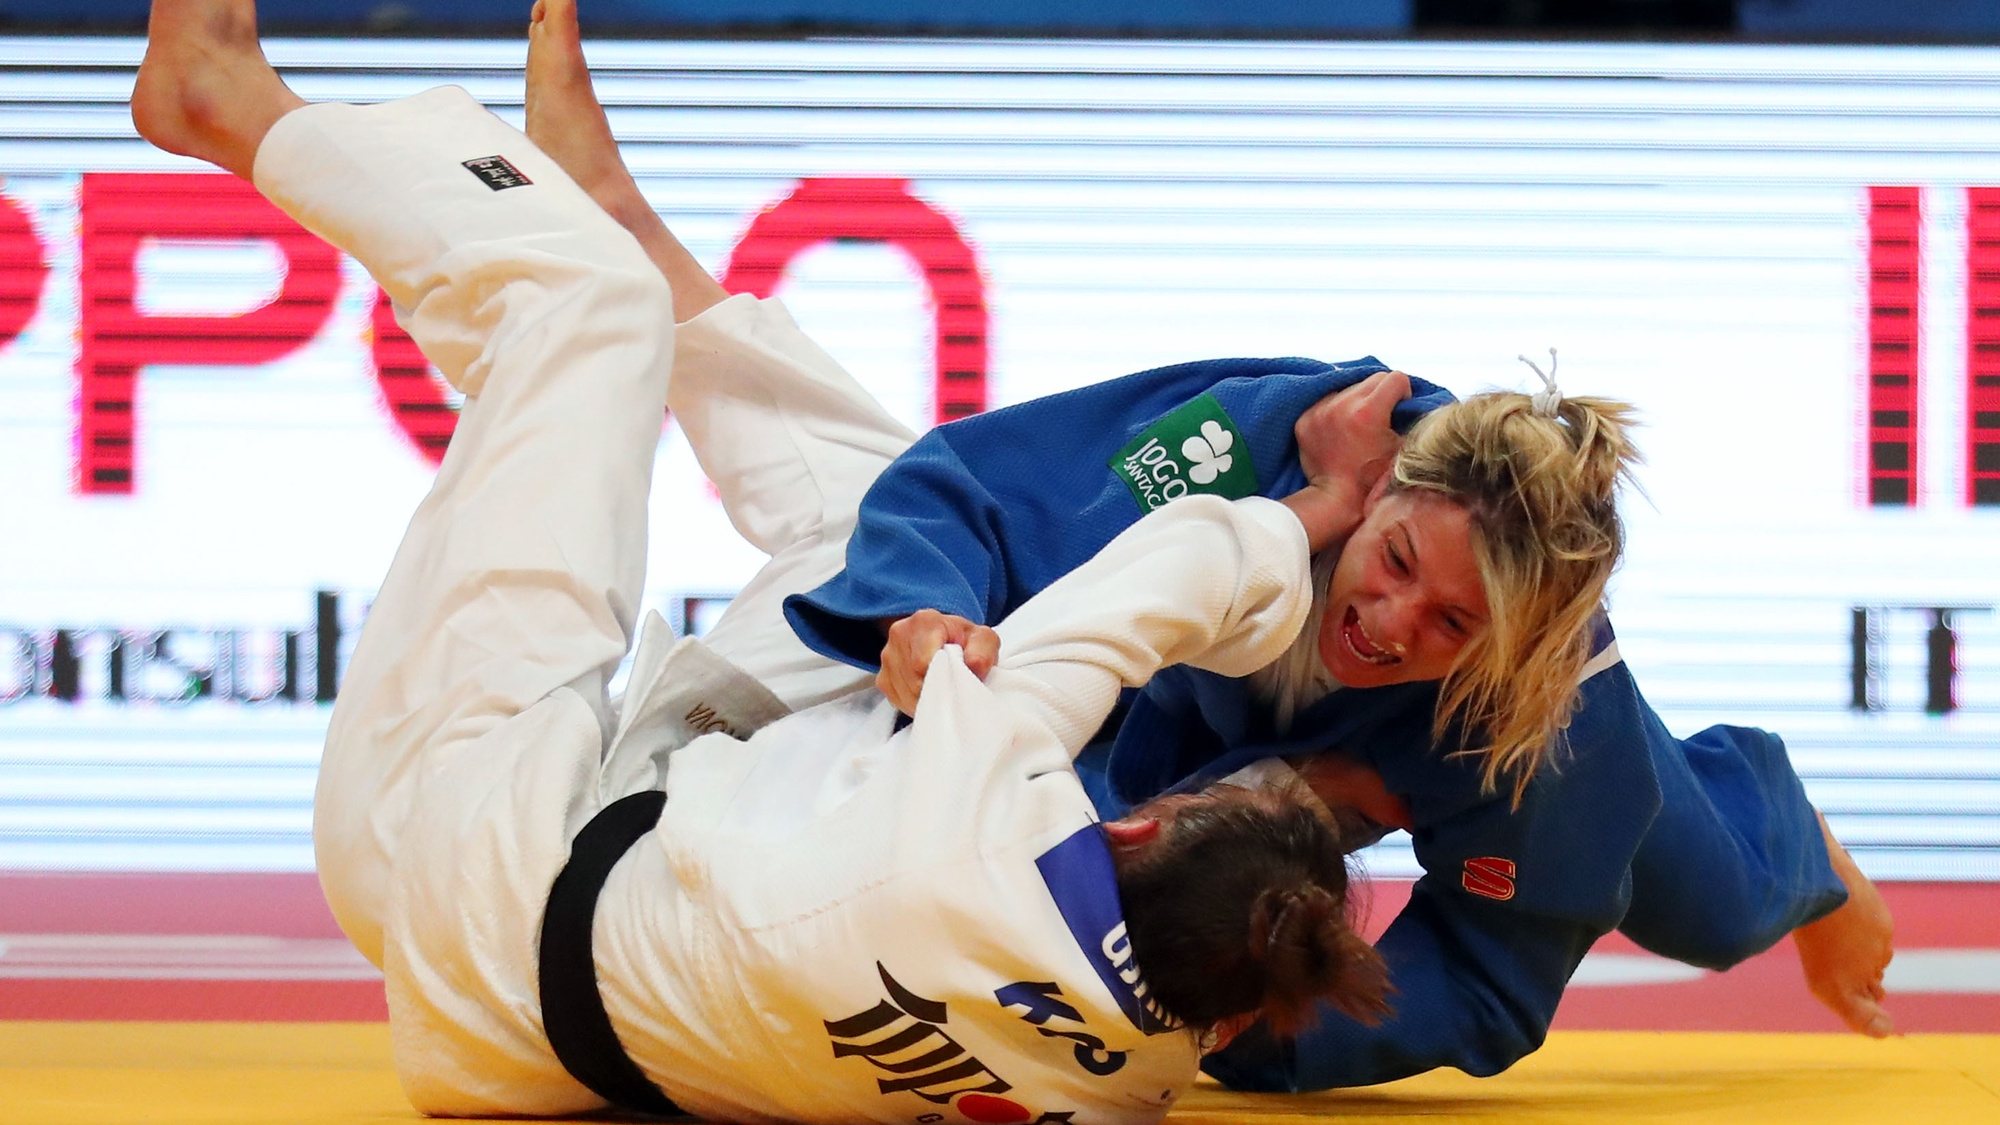 Telma Monteiro of Portugal ( blue) wins with an ippon against Nora Gjakova of Kosovo (white) during the semi-finals match in the woman&#039;s -57kg category at the European Judo Championships in Lisbon, Portugal, 16 April 2021. NUNO VEIGA/LUSA